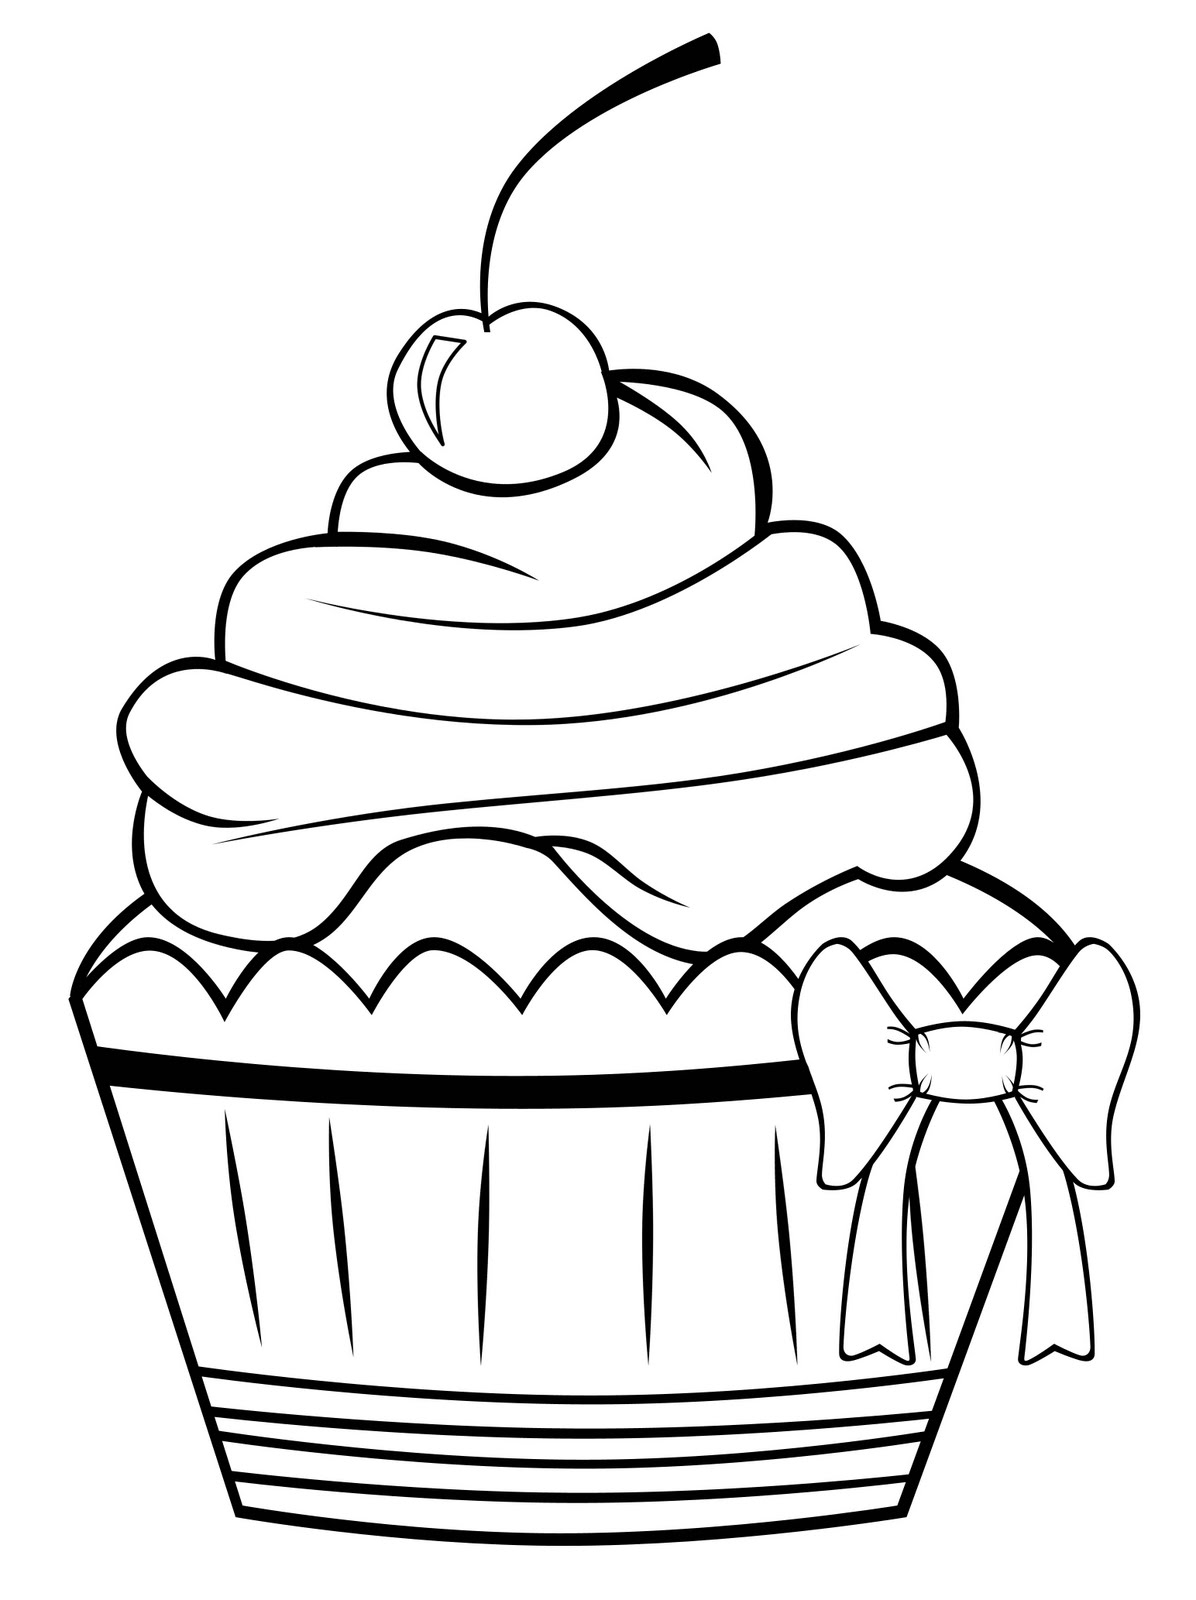 Printable Cupcake Coloring Pages For Kids | HelloColoring.com ...